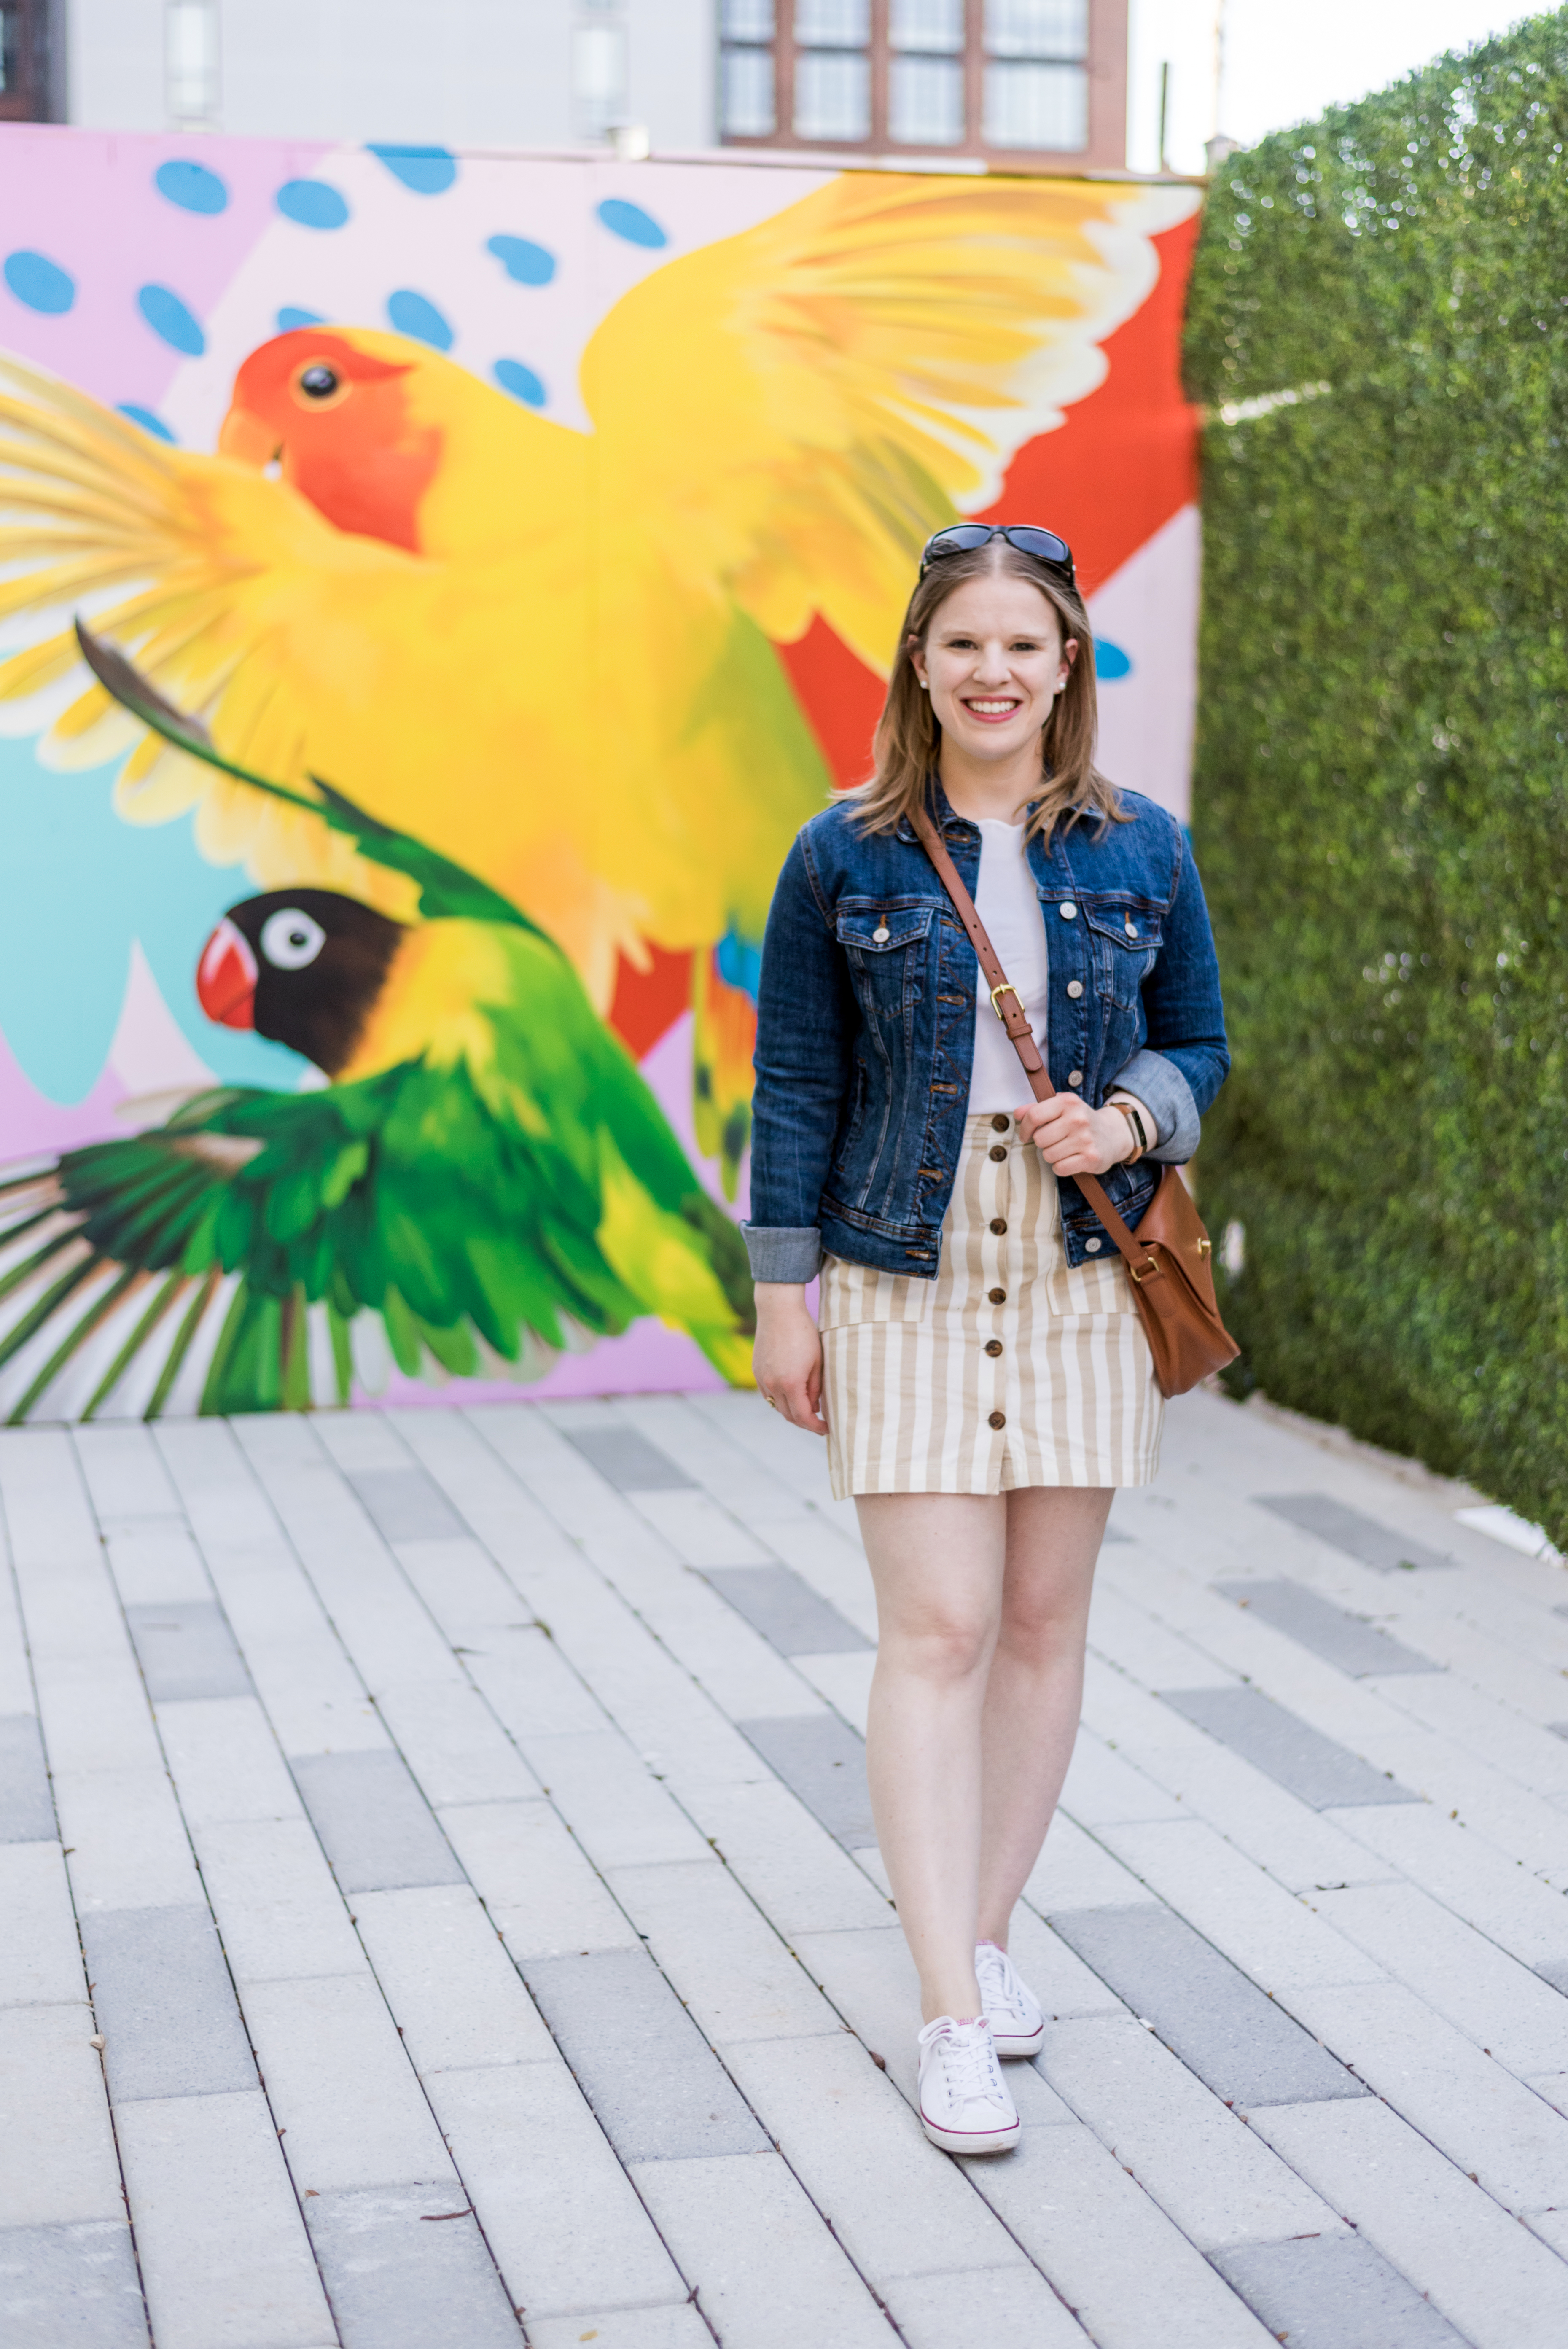 What To Wear With A Jean Jacket: 10 Ideas To Style Denim JacketsHelloGiggles